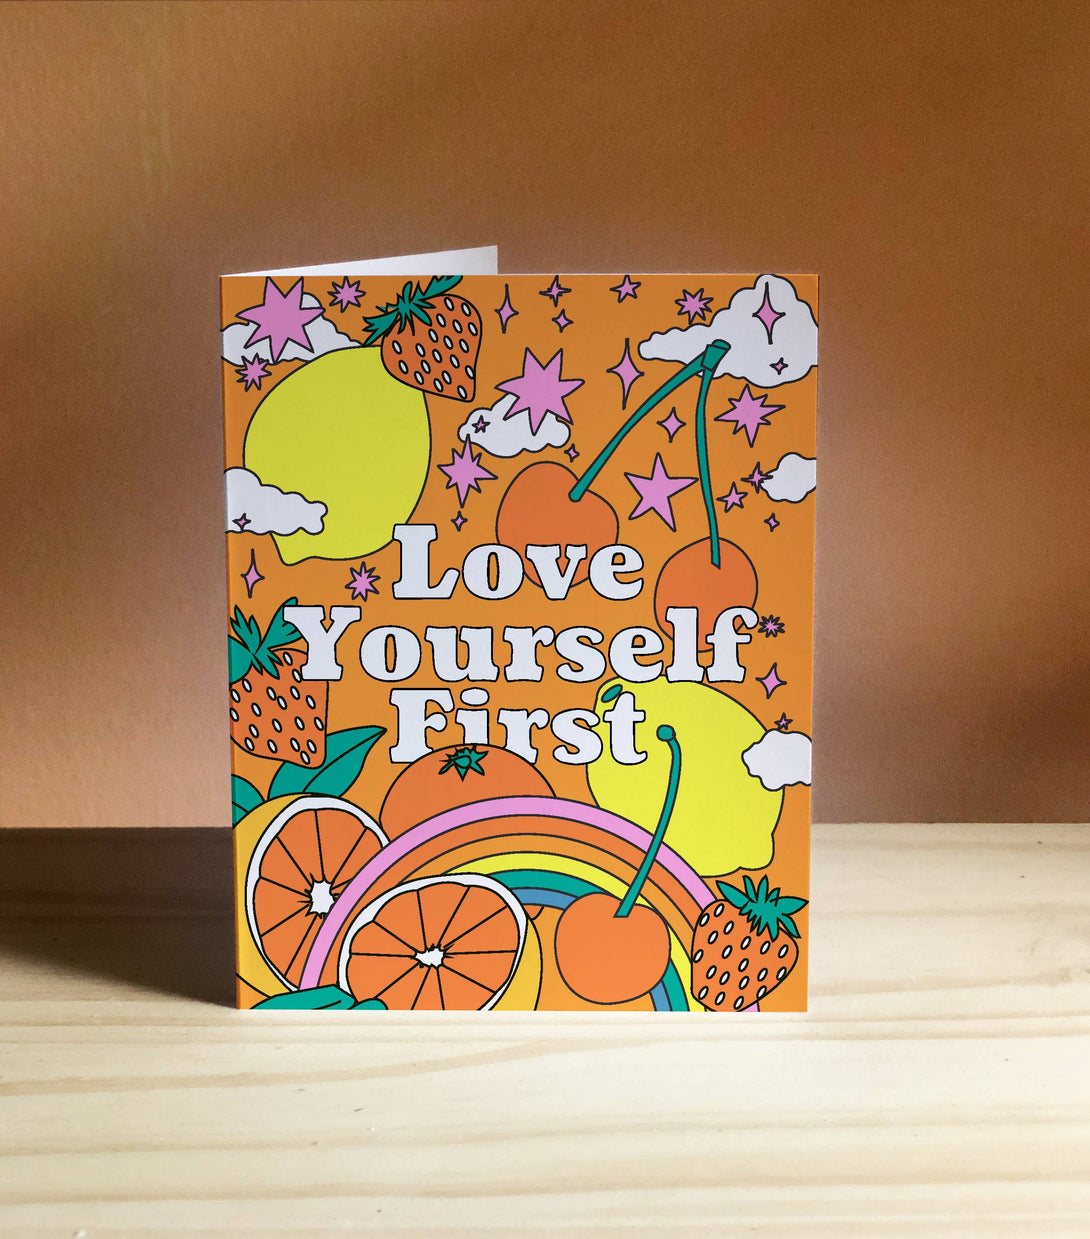 Ash + Chess - "Love Yourself First" Self Love Groovy Greeting Card Greeting Card Ash + Chess   